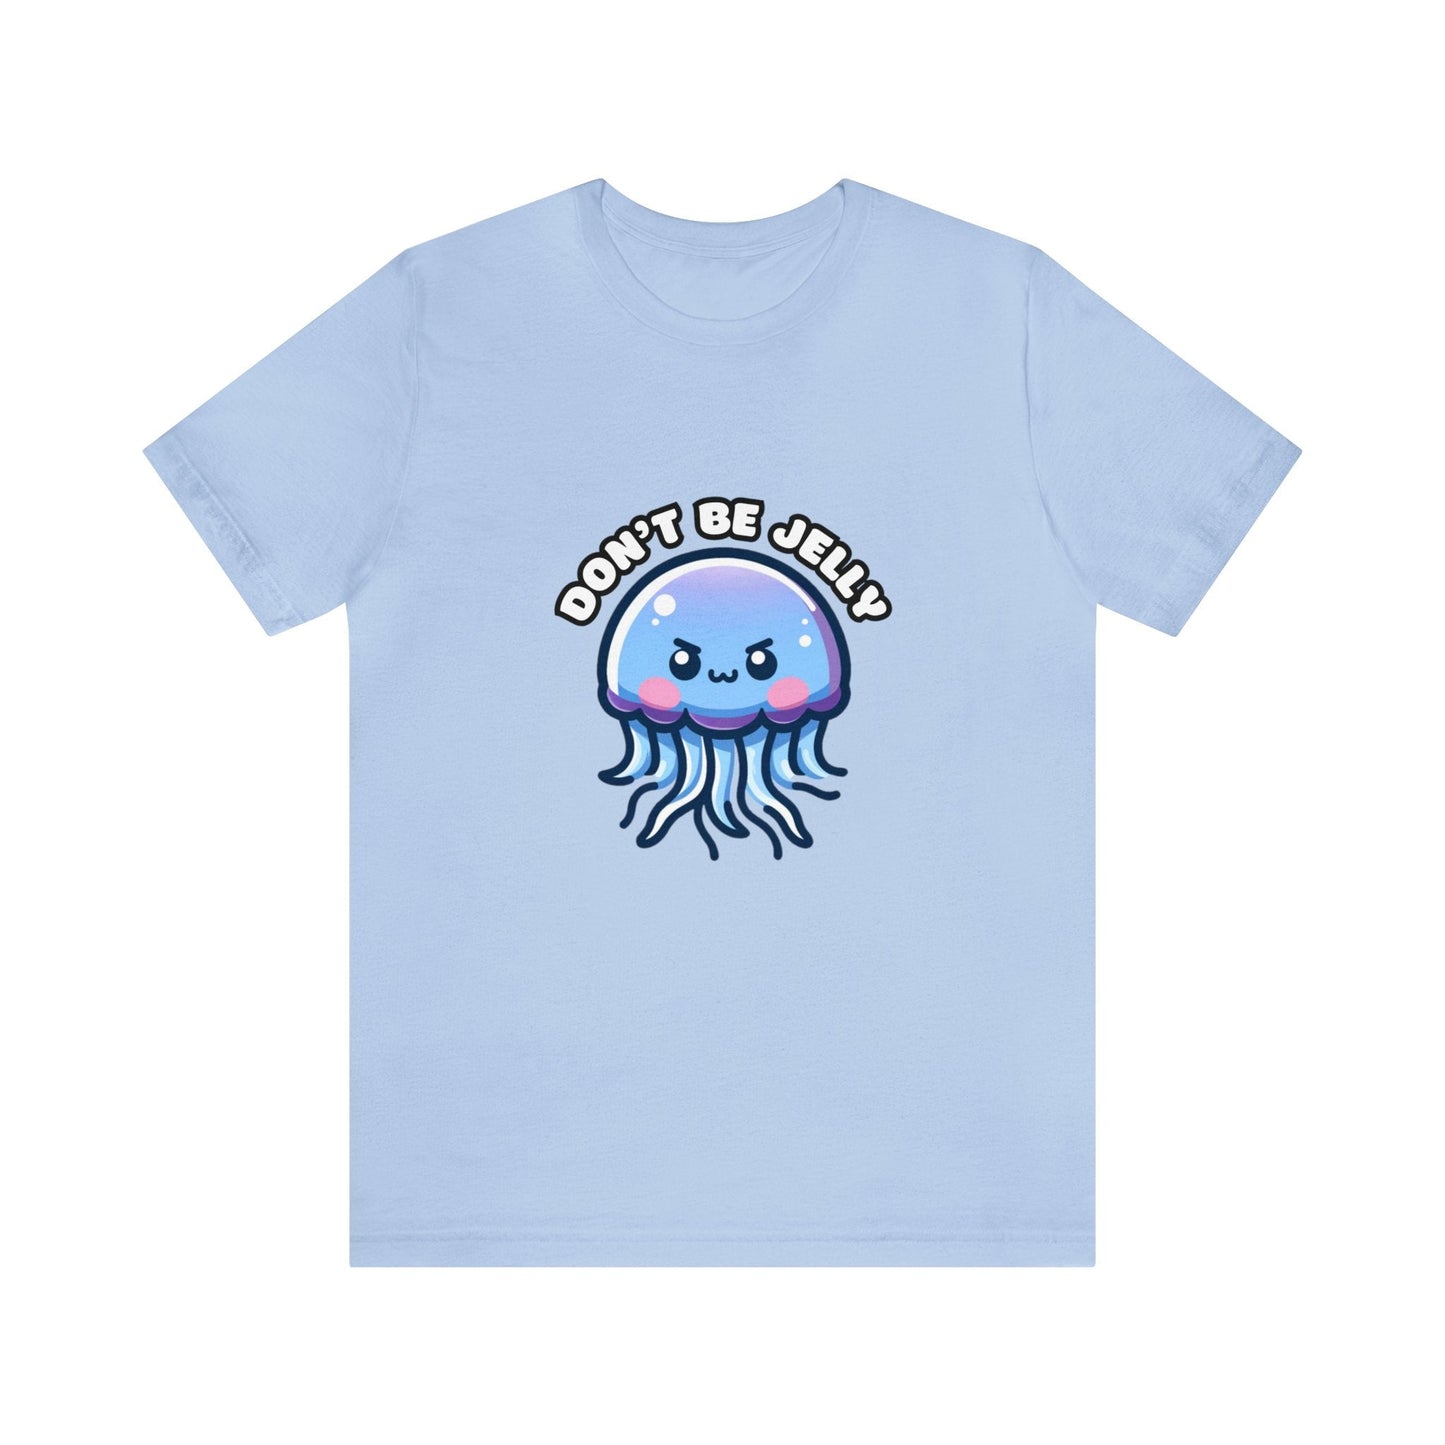 US - Don't Be Jelly - Jellyfish T-shirt Baby Blue / S